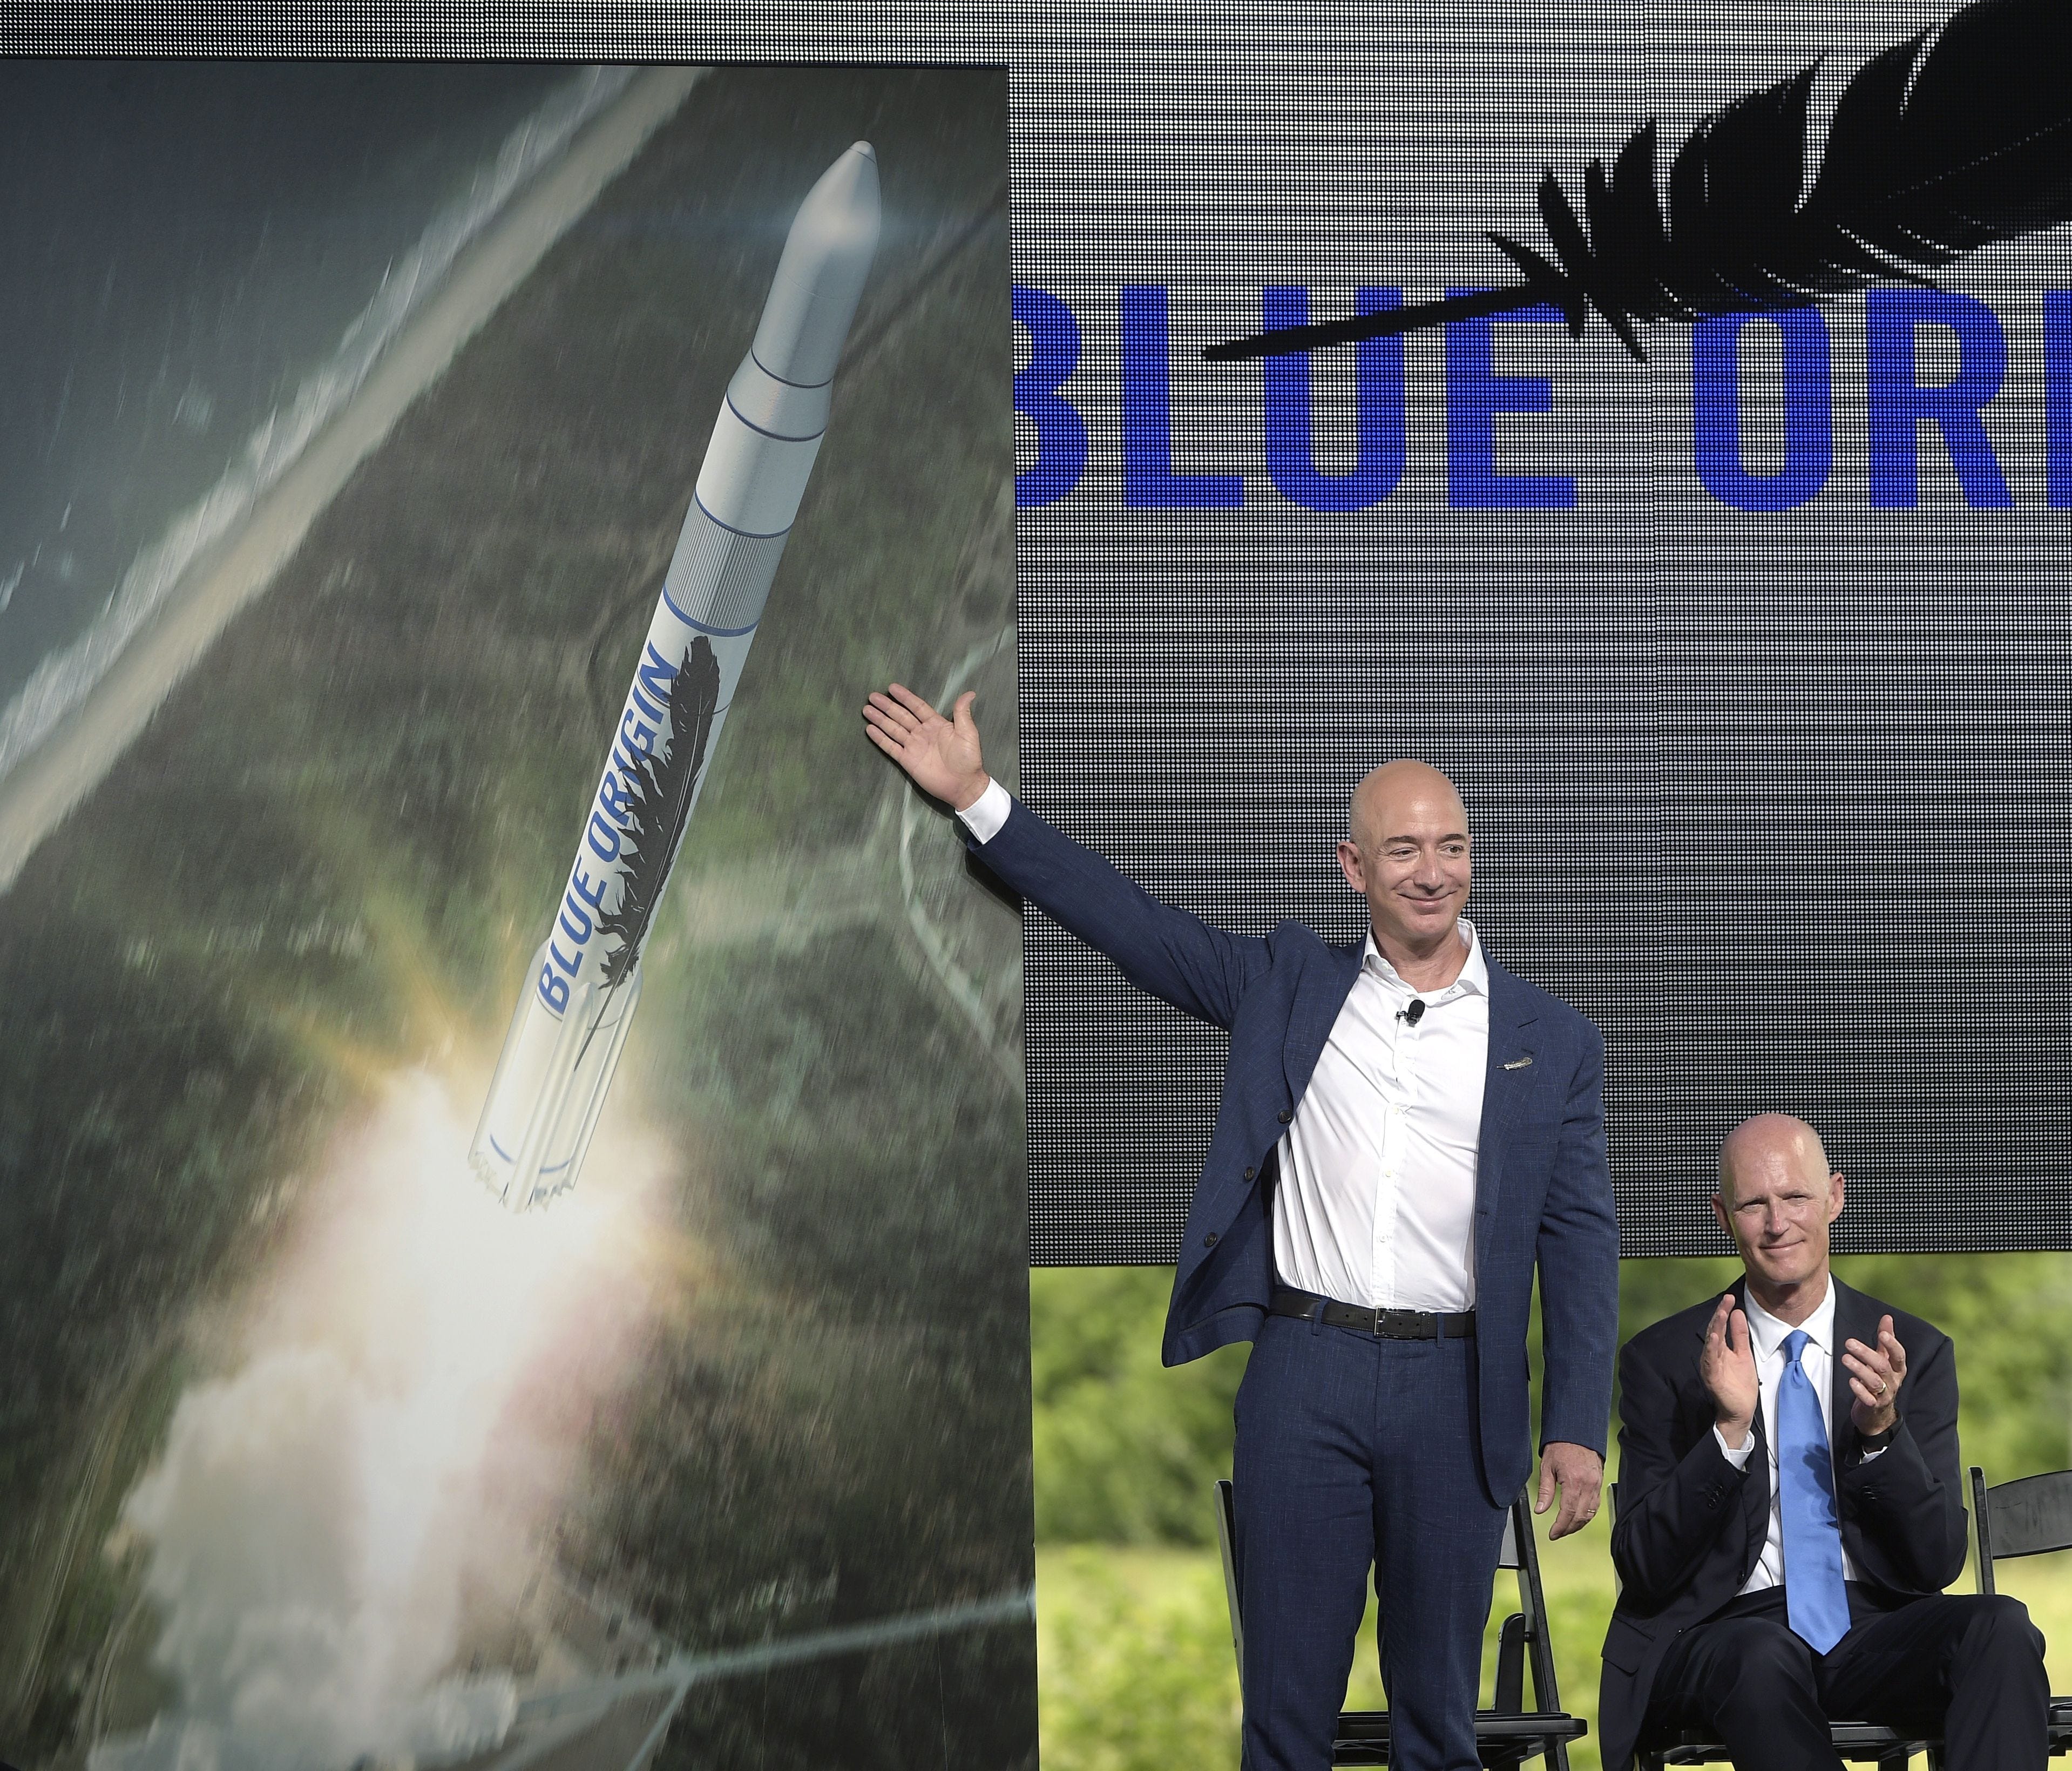 Amazon CEO Jeff Bezos, left, unveils the new Blue Origin rocket, as Florida Gov. Rick Scott applauds, during a news conference at the Cape Canaveral Air Force Station in Cape Canaveral, Fla., in September